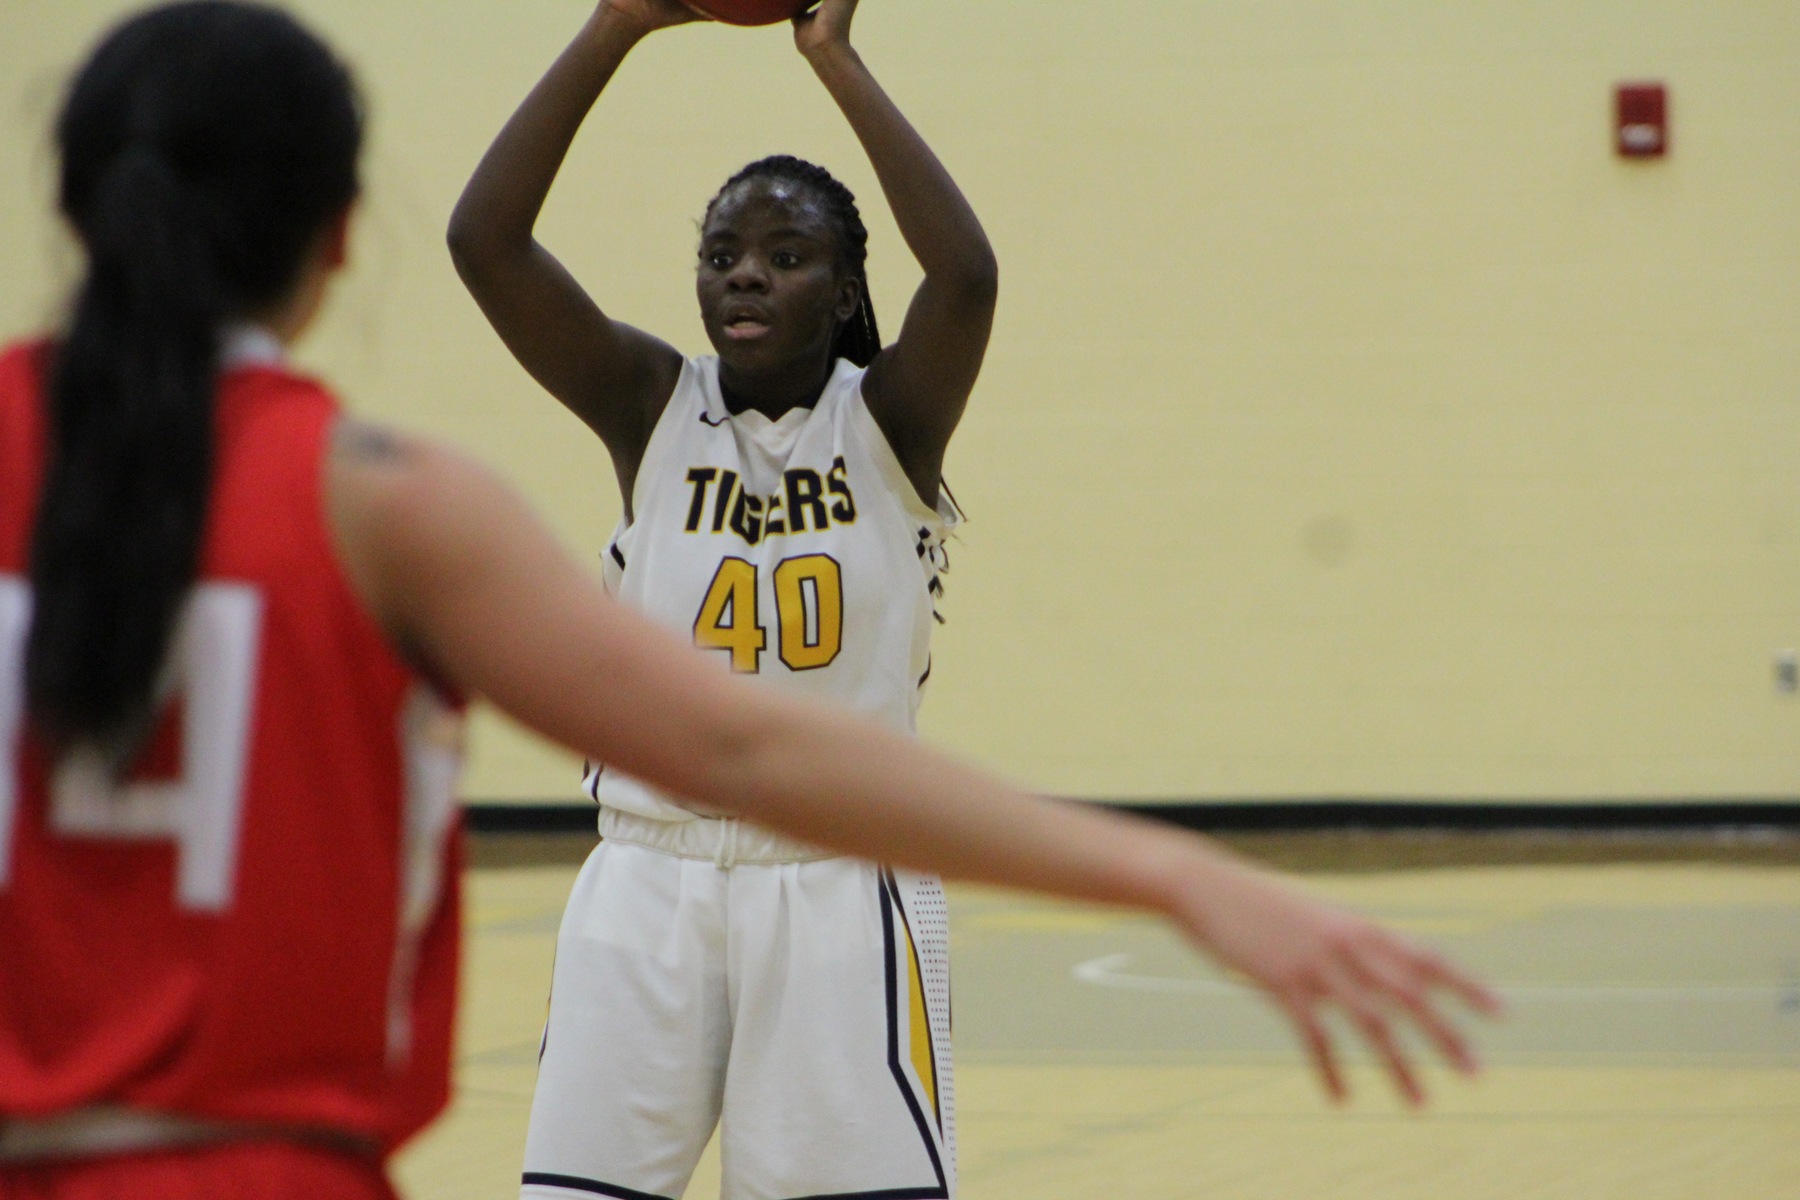 Estelle Eduardo scored 20 points and added 11 rebounds to carry MCC past Grand View JV Tuesday night